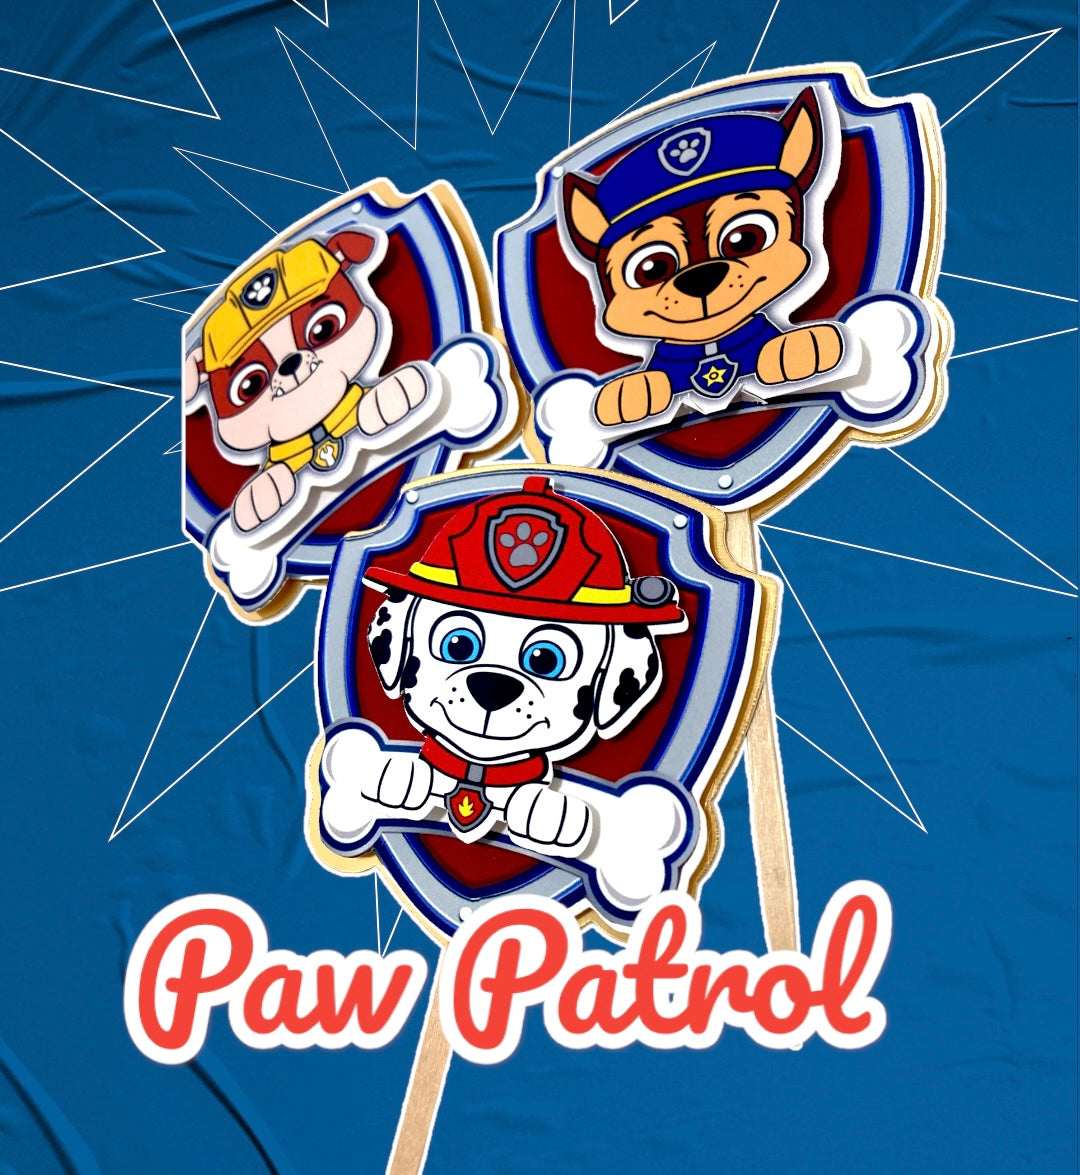 Paw patrol inspired cupcake toppers -Chase paw patrol cupcake toppers - Skye pink paw patrol cupcake toppers